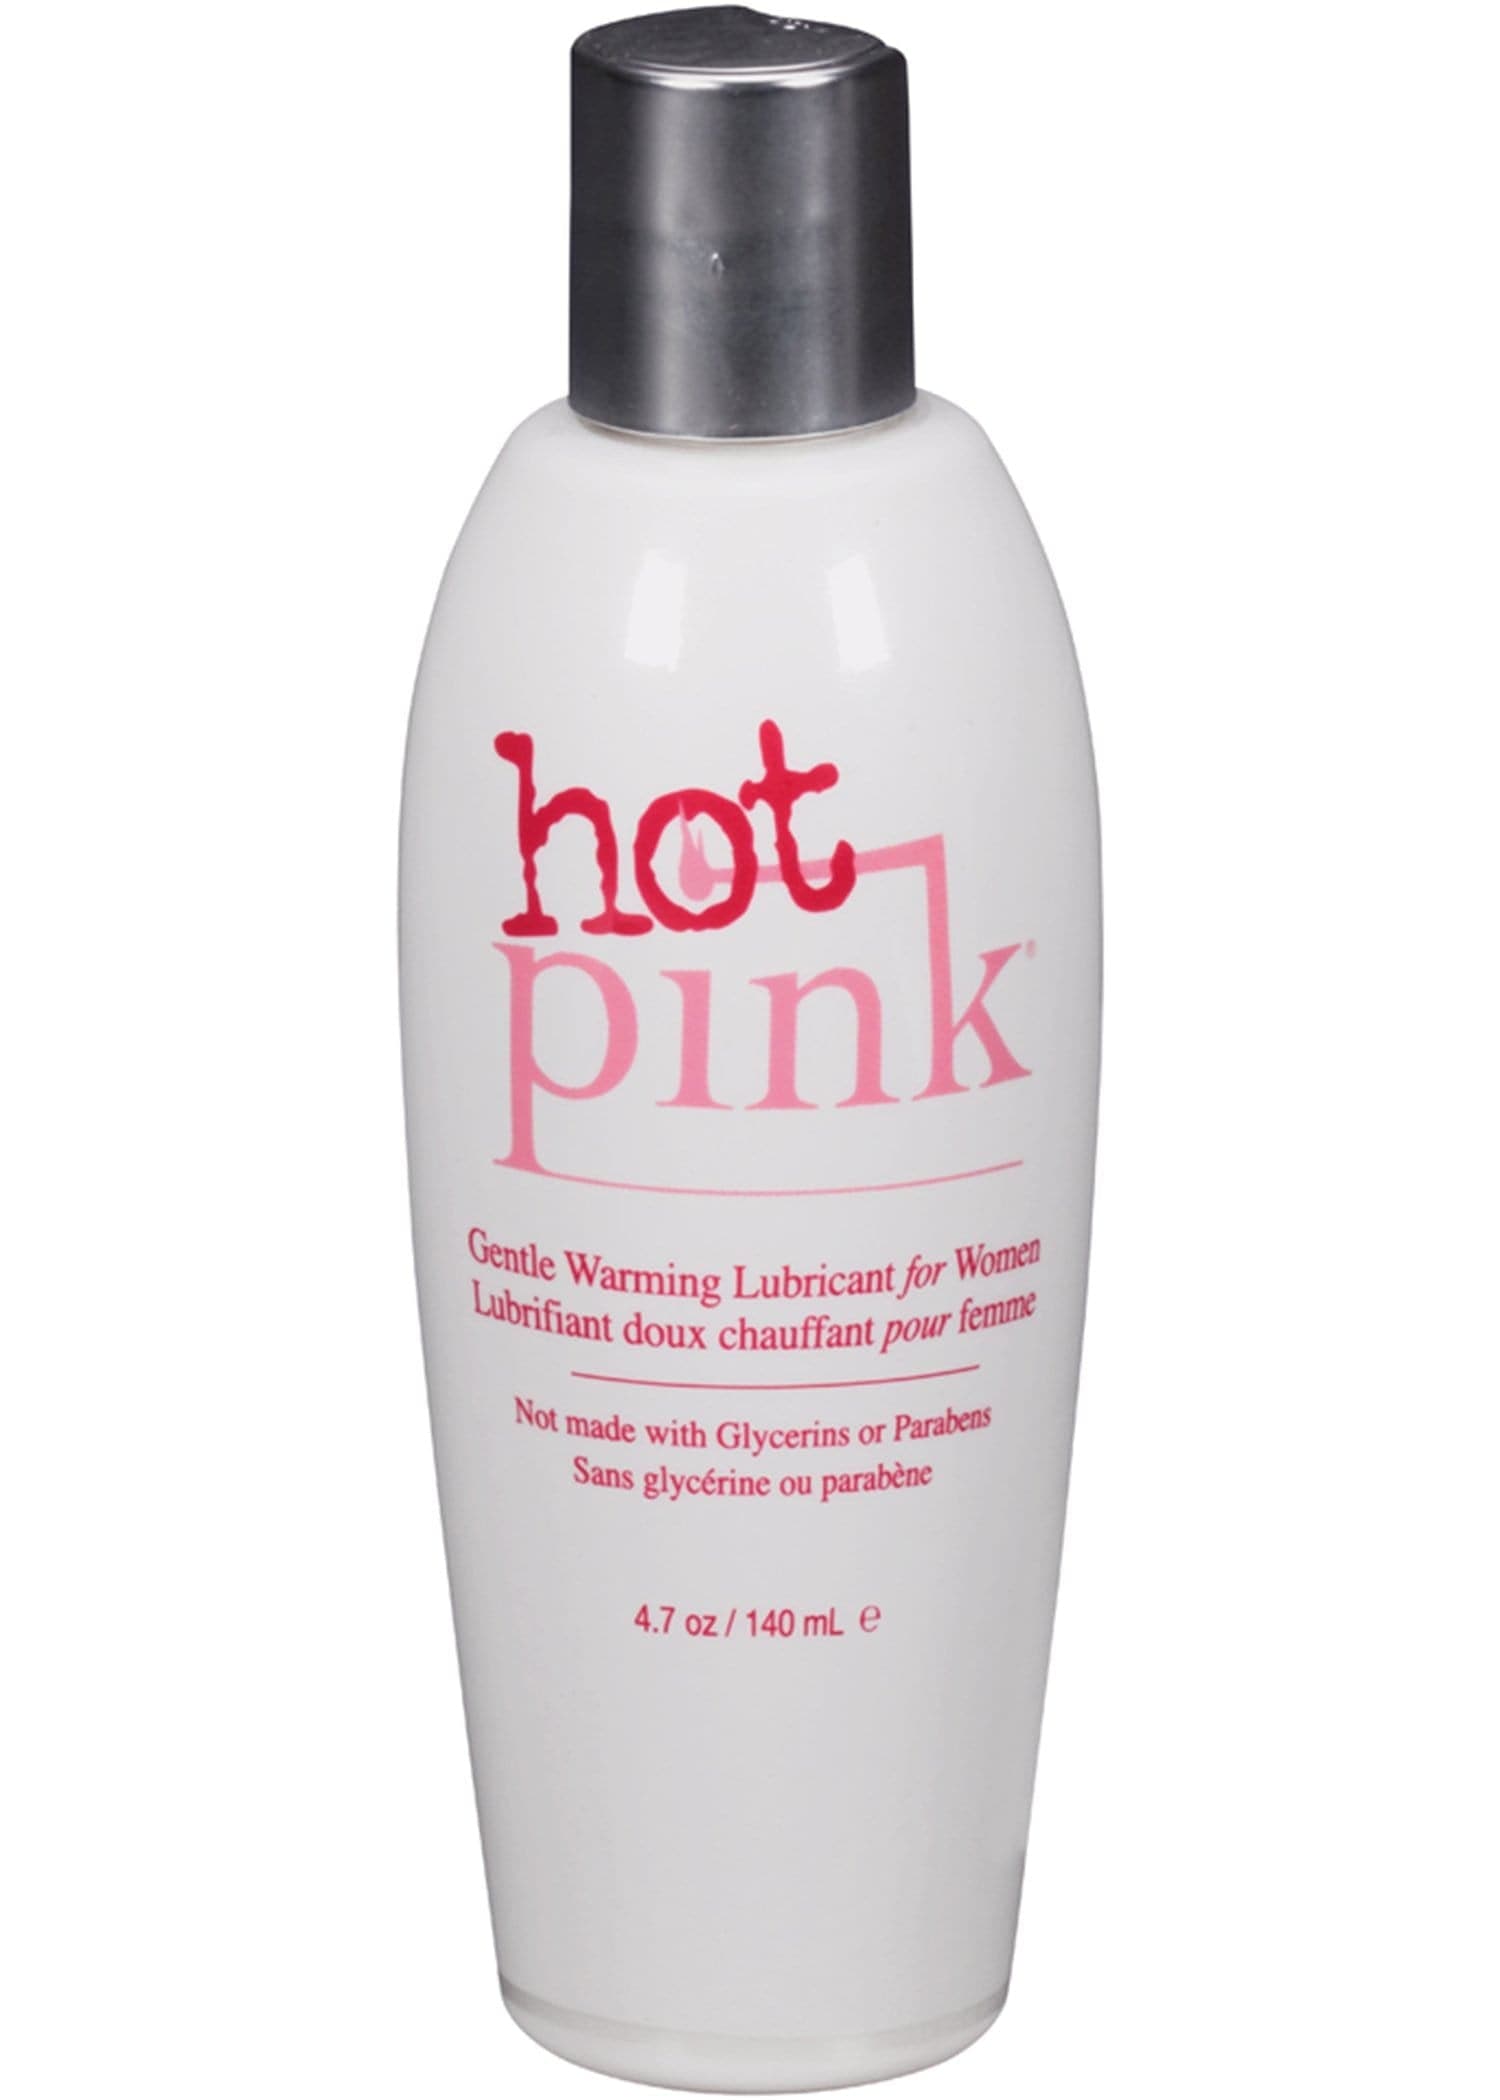 hot pink warming lubricant for women 4 7 oz 140 ml